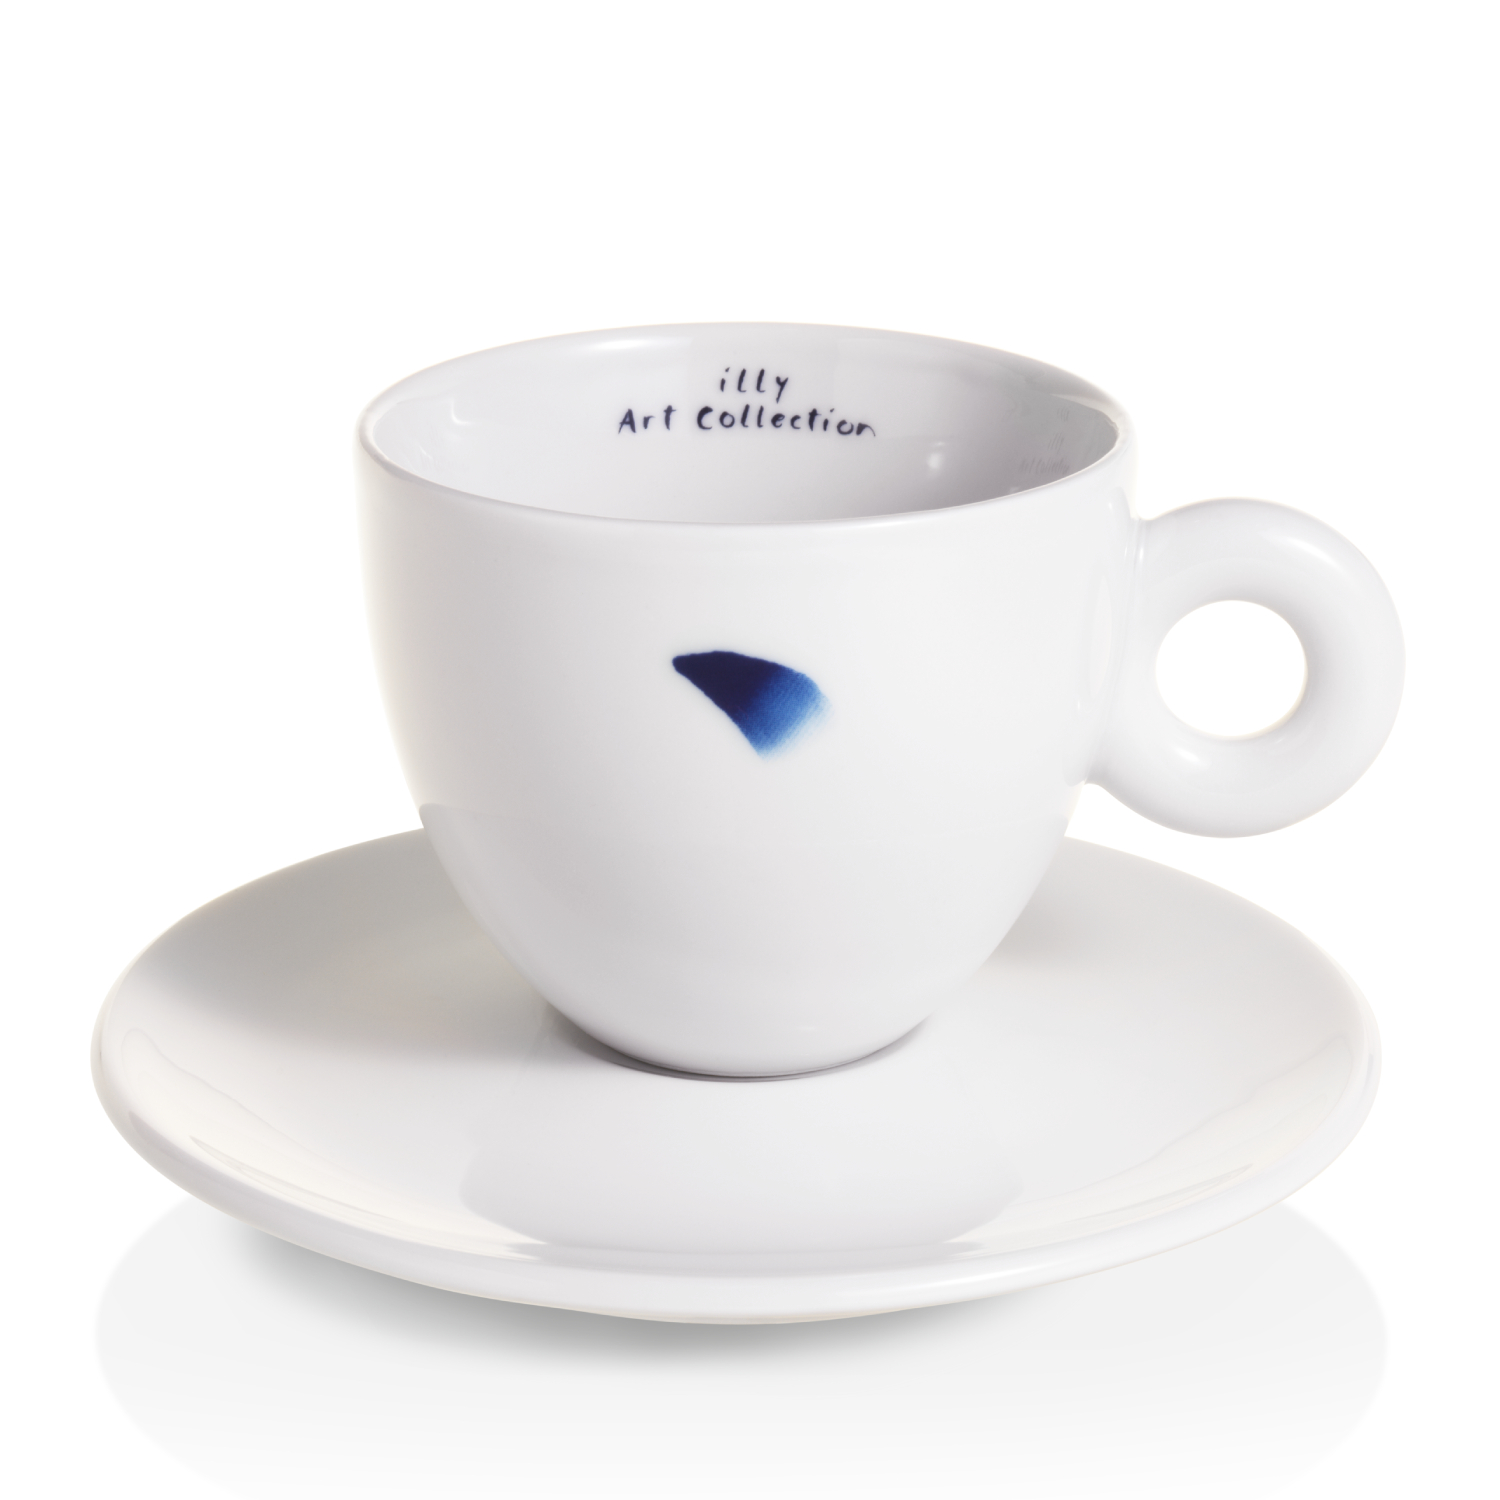 illy Art Collection LEE UFAN Σετ Δώρου 2 Cappuccino Cups, Φλιτζάνια , 02-02-2018